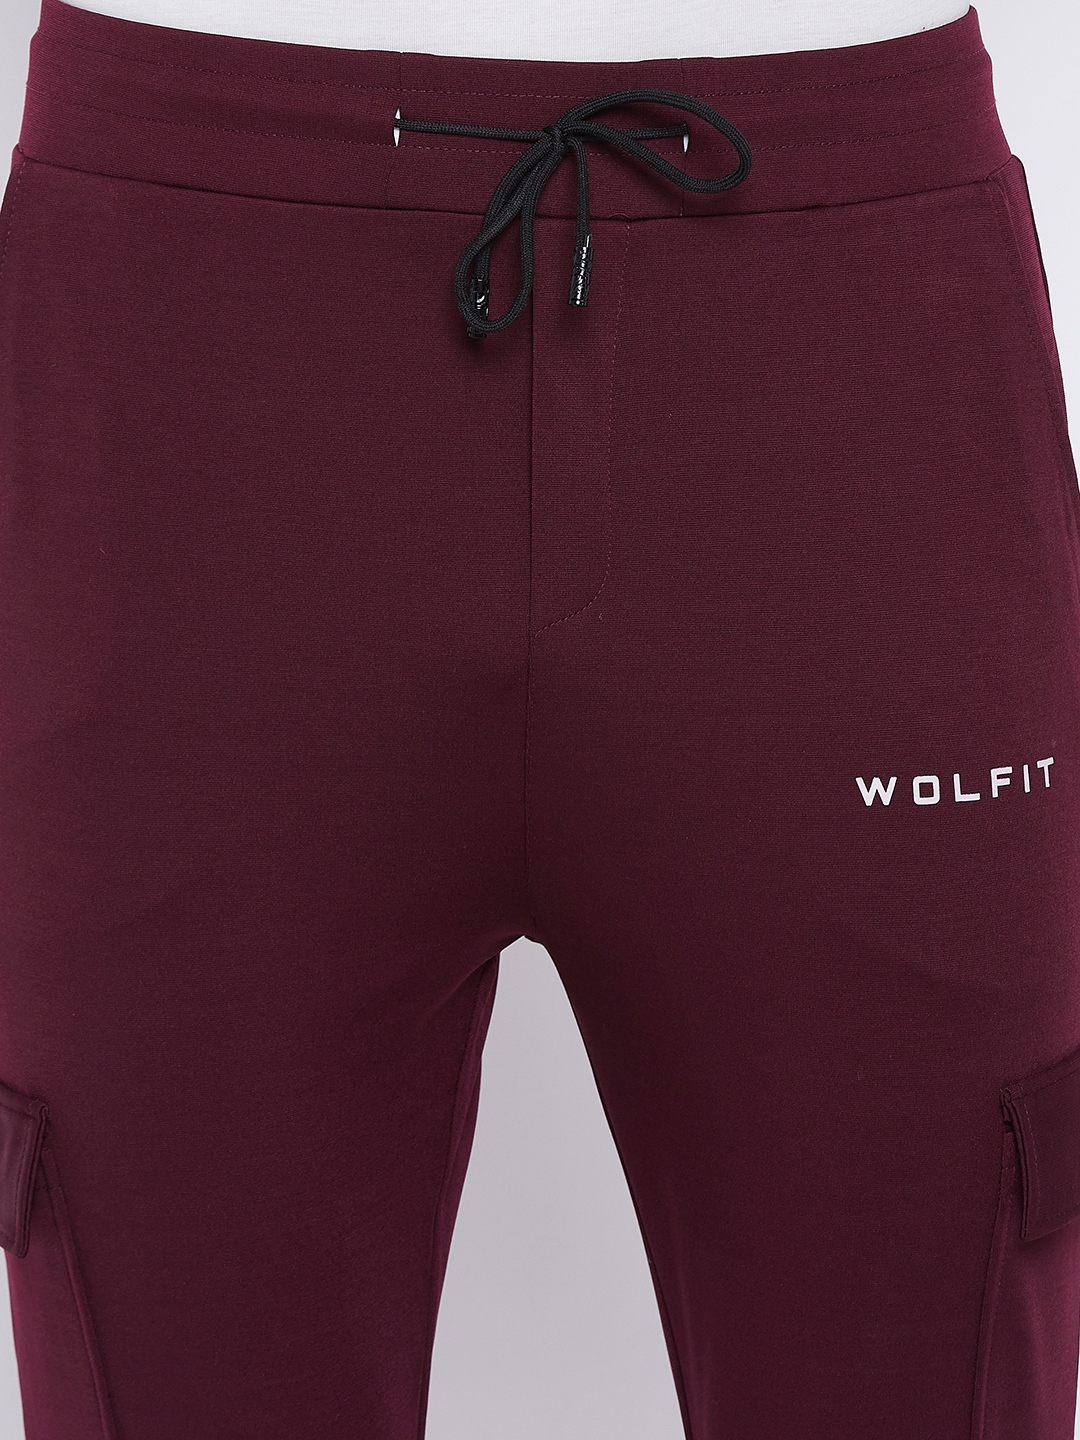 trackpant-cargo-maroon-wolfit